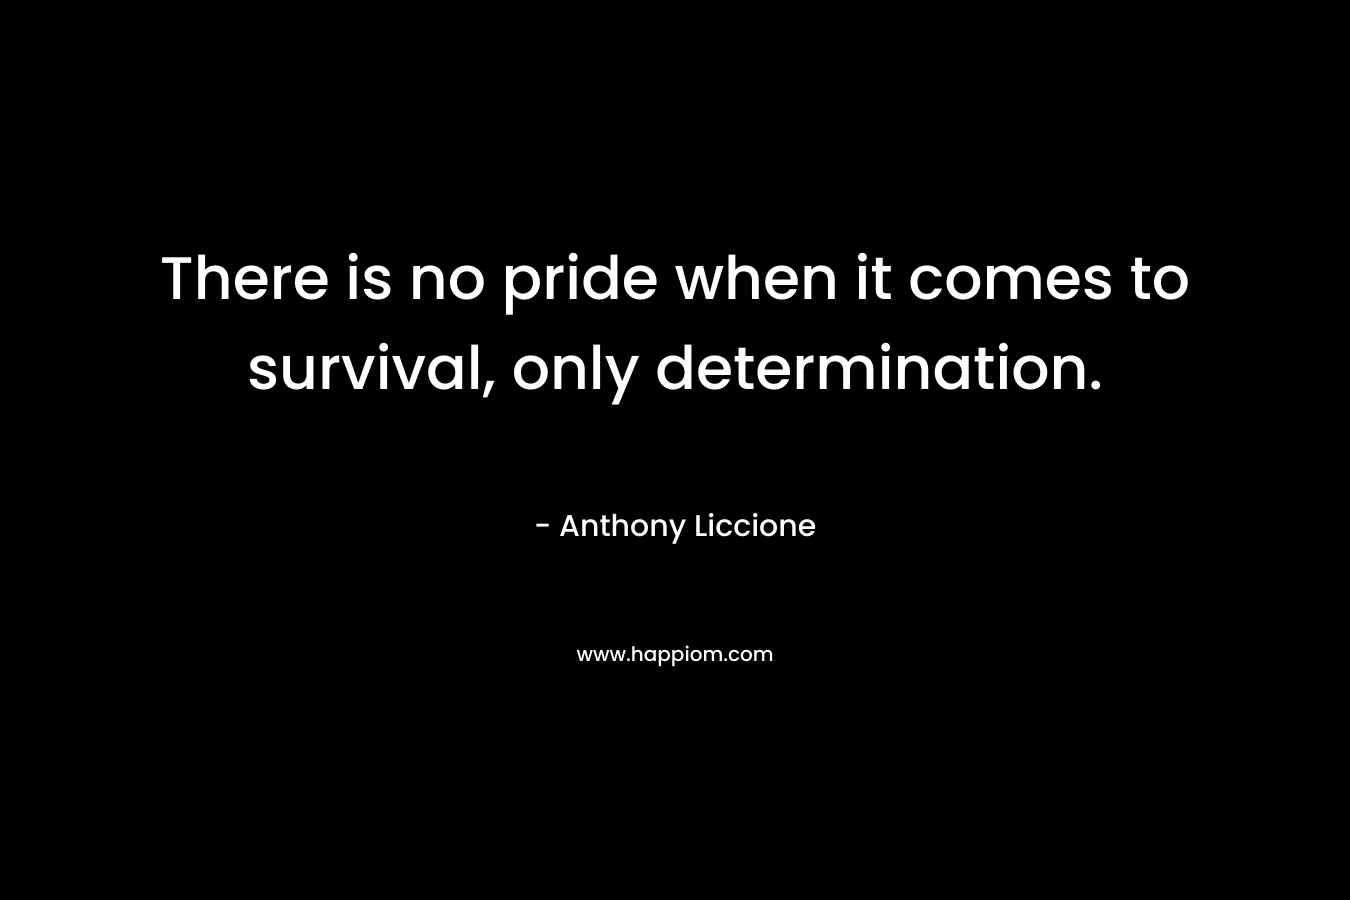 There is no pride when it comes to survival, only determination. – Anthony Liccione